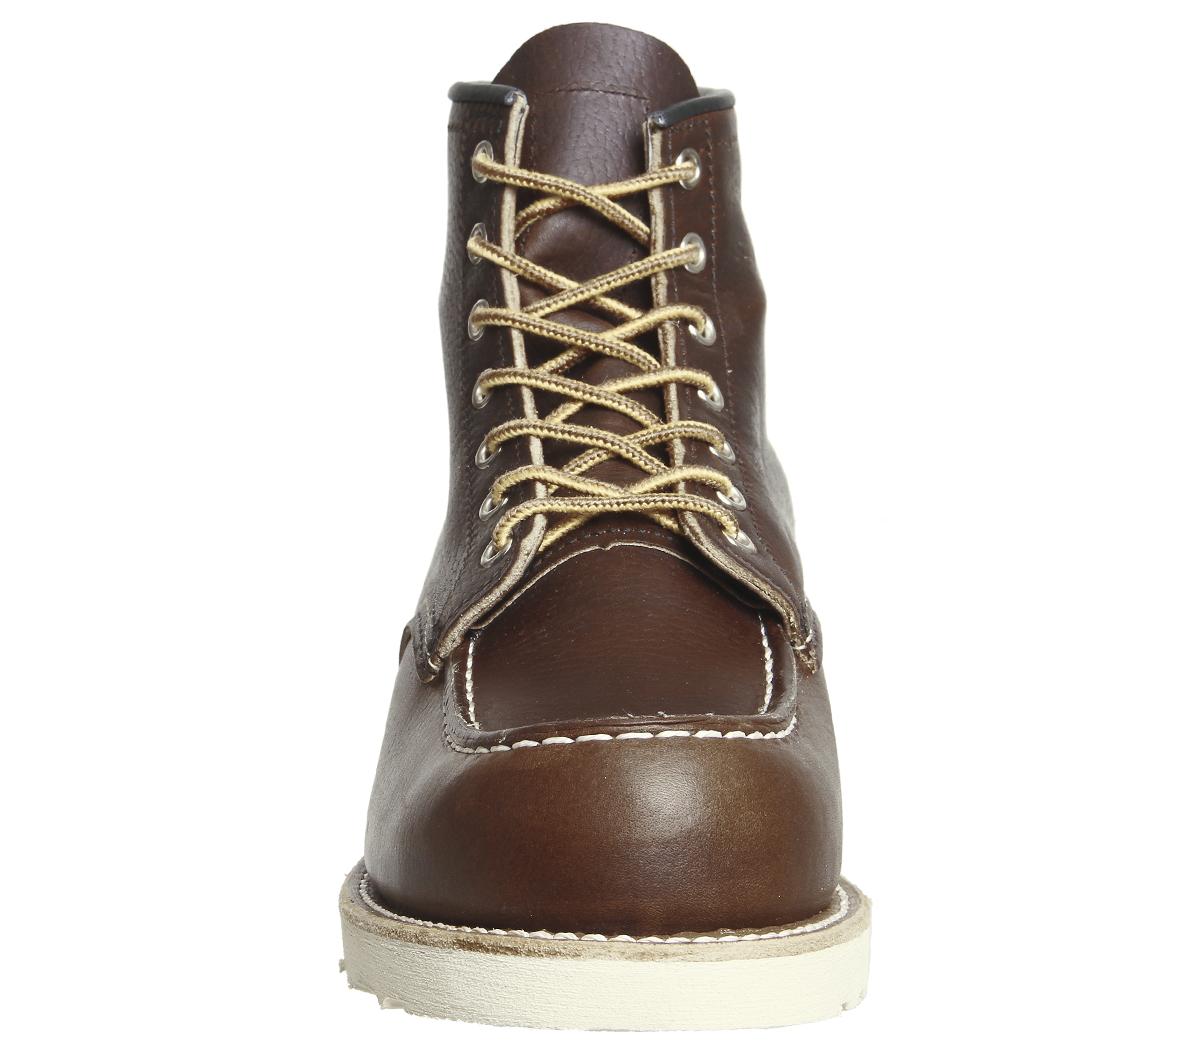 Redwing Work Wedge Boots Brown Leather - Boots